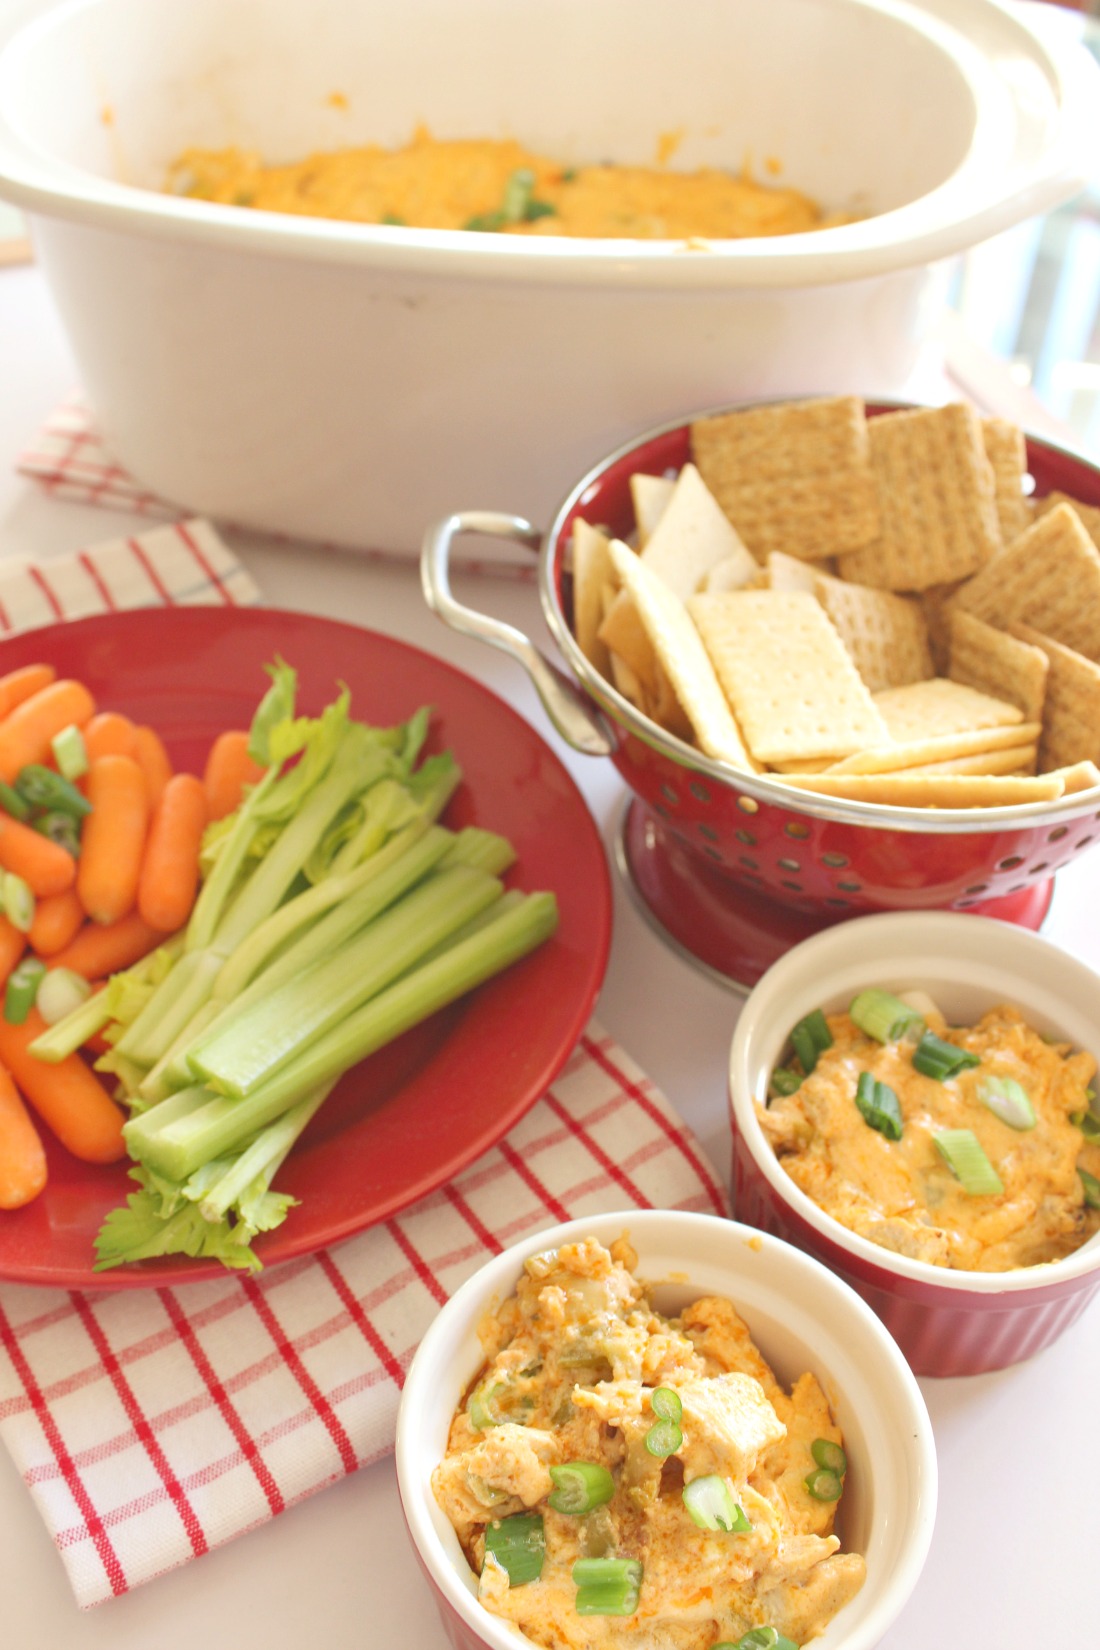 Buffalo Chicken Dip in the Slow Cooker